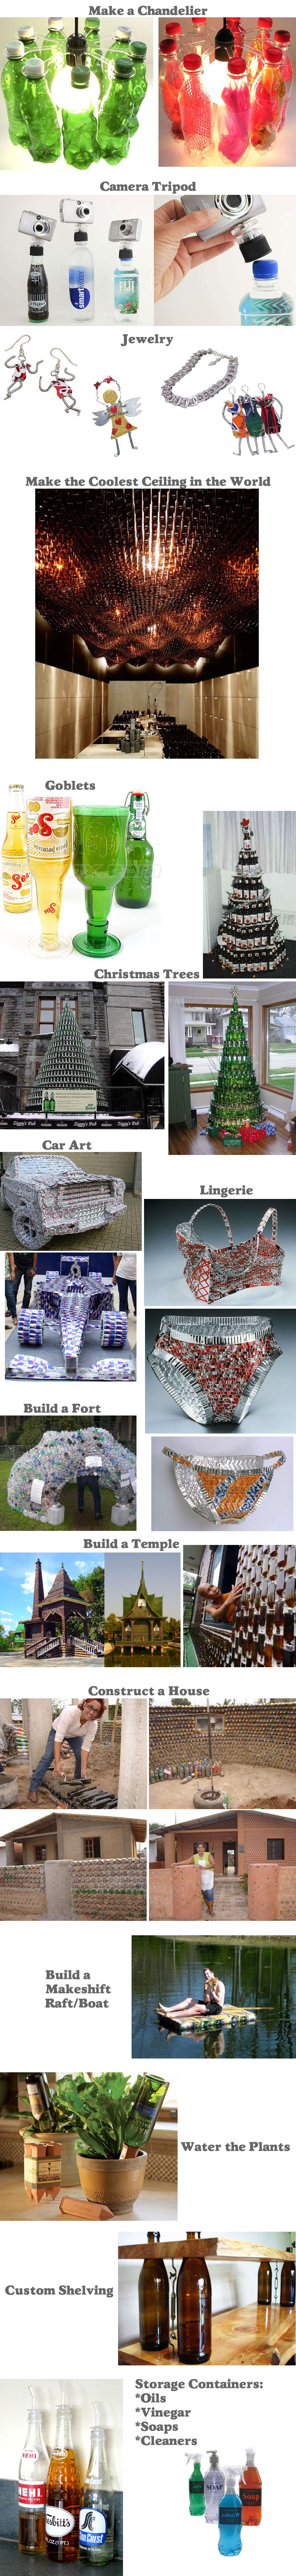 ways to reuse and recycle cans and bottles